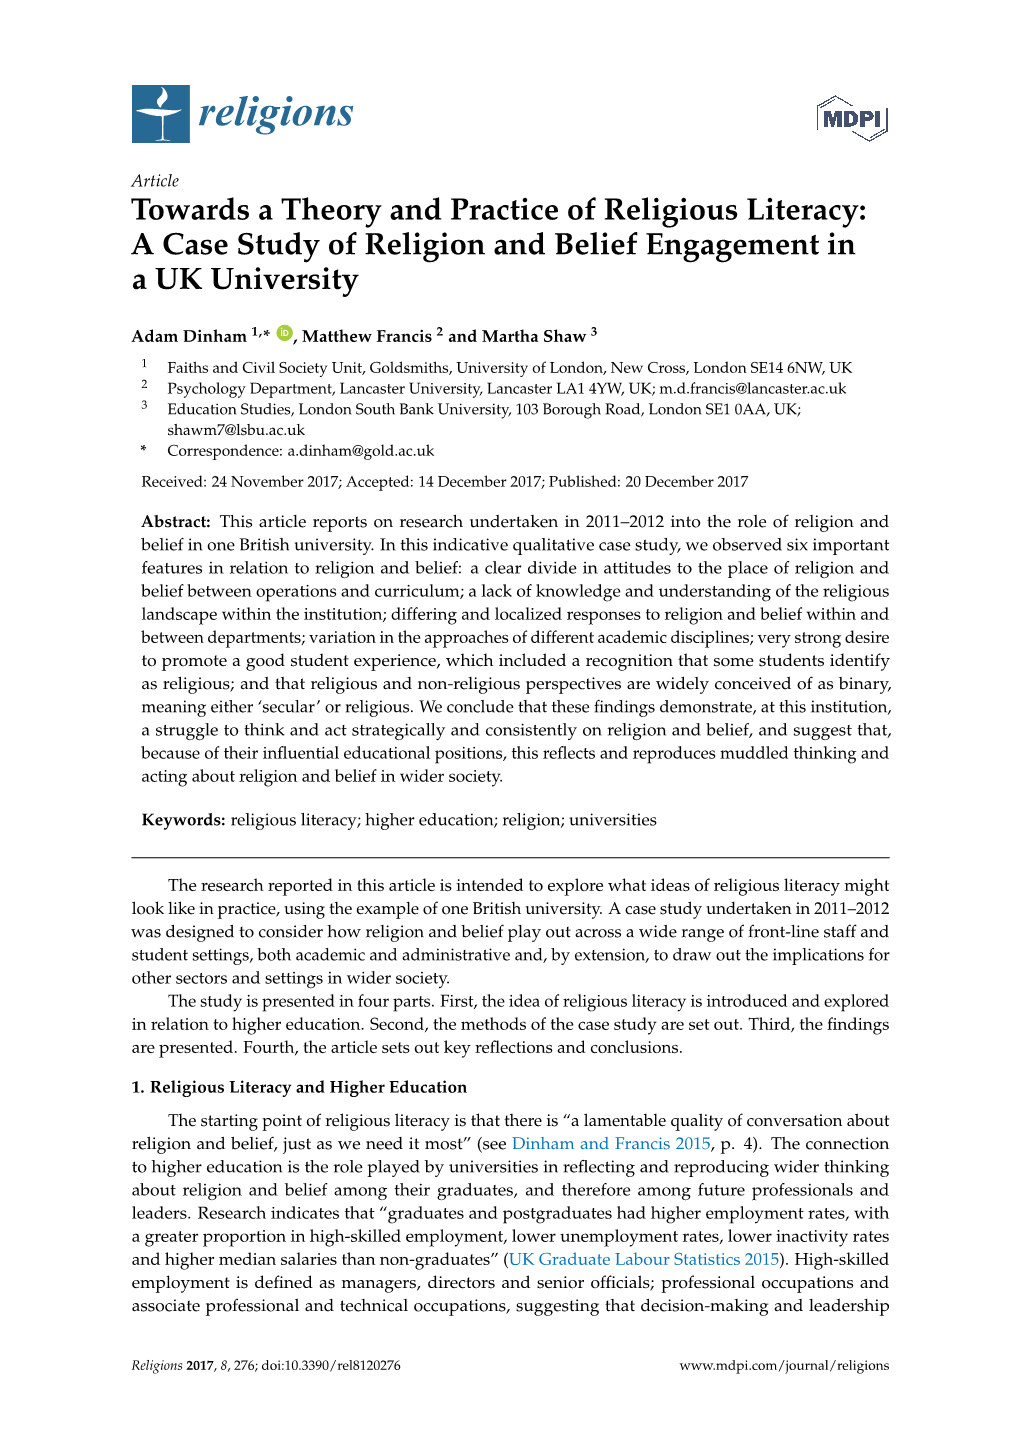 Towards a Theory and Practice of Religious Literacy: a Case Study of Religion and Belief Engagement in a UK University